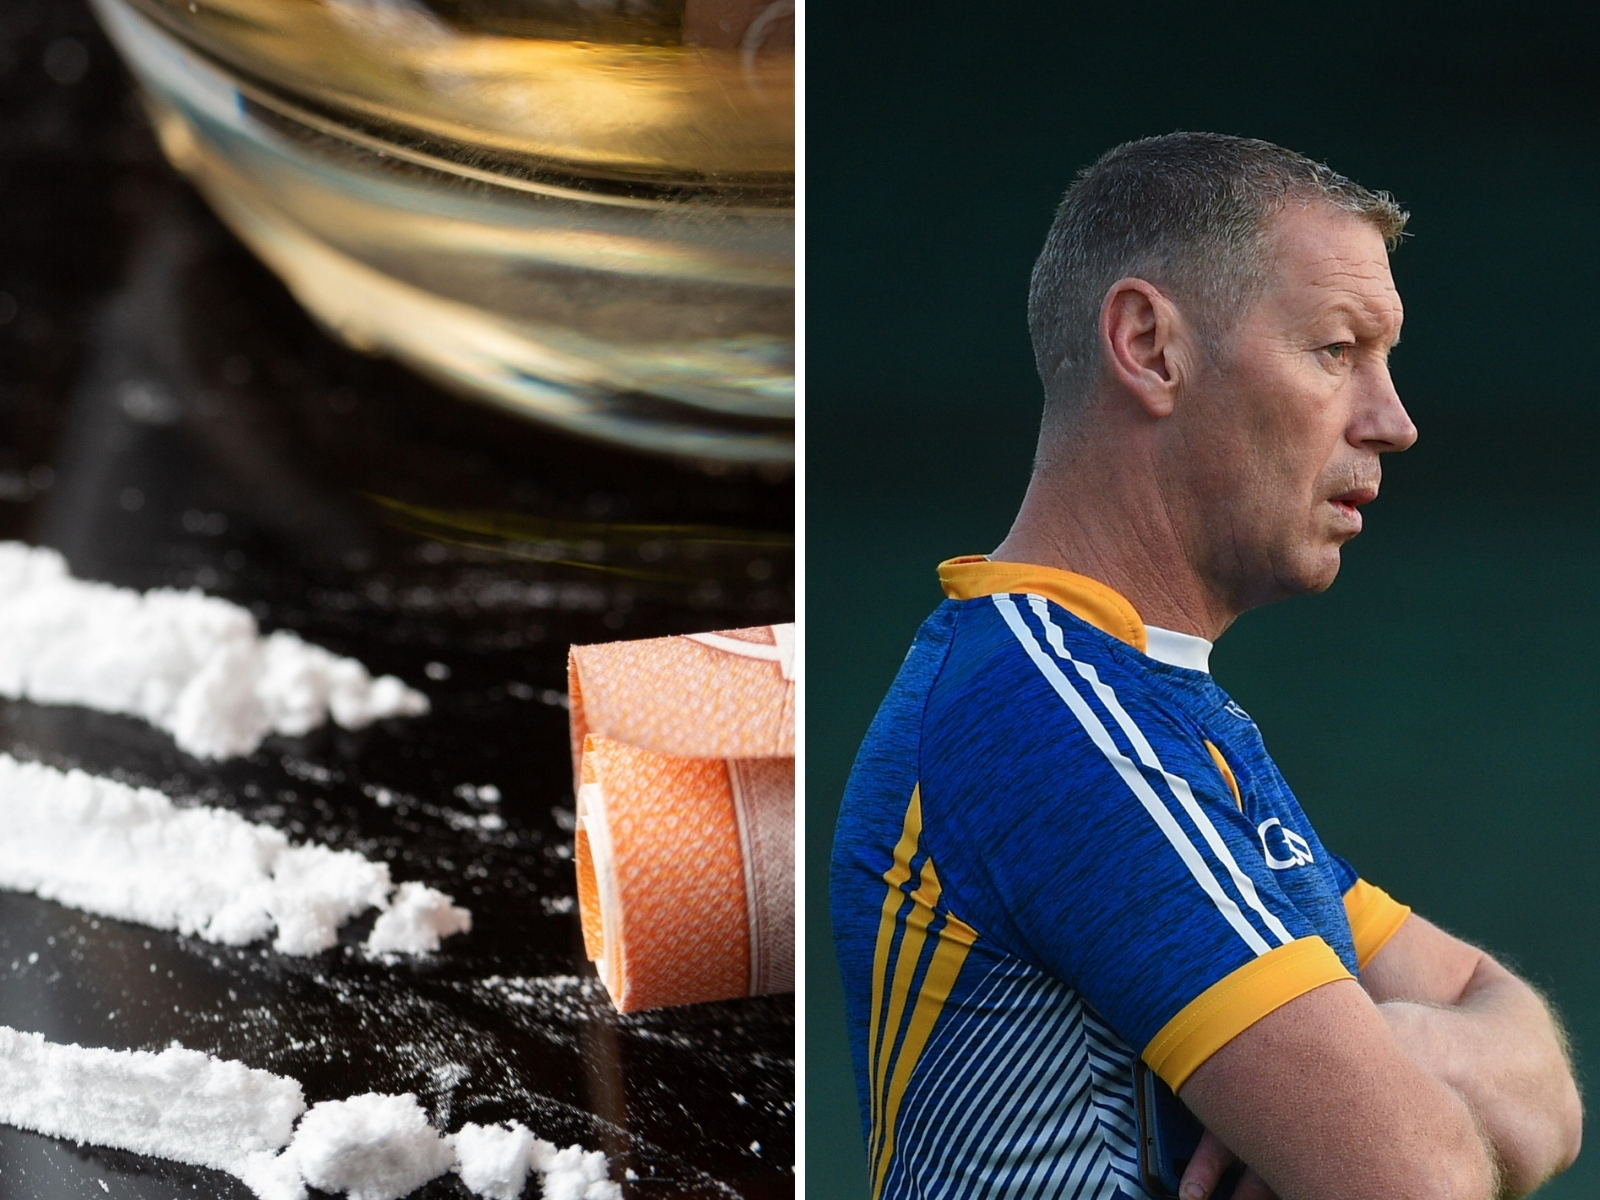 Limerick hurling star Ciarán Carey and a file photo of cocaine and alcohol.